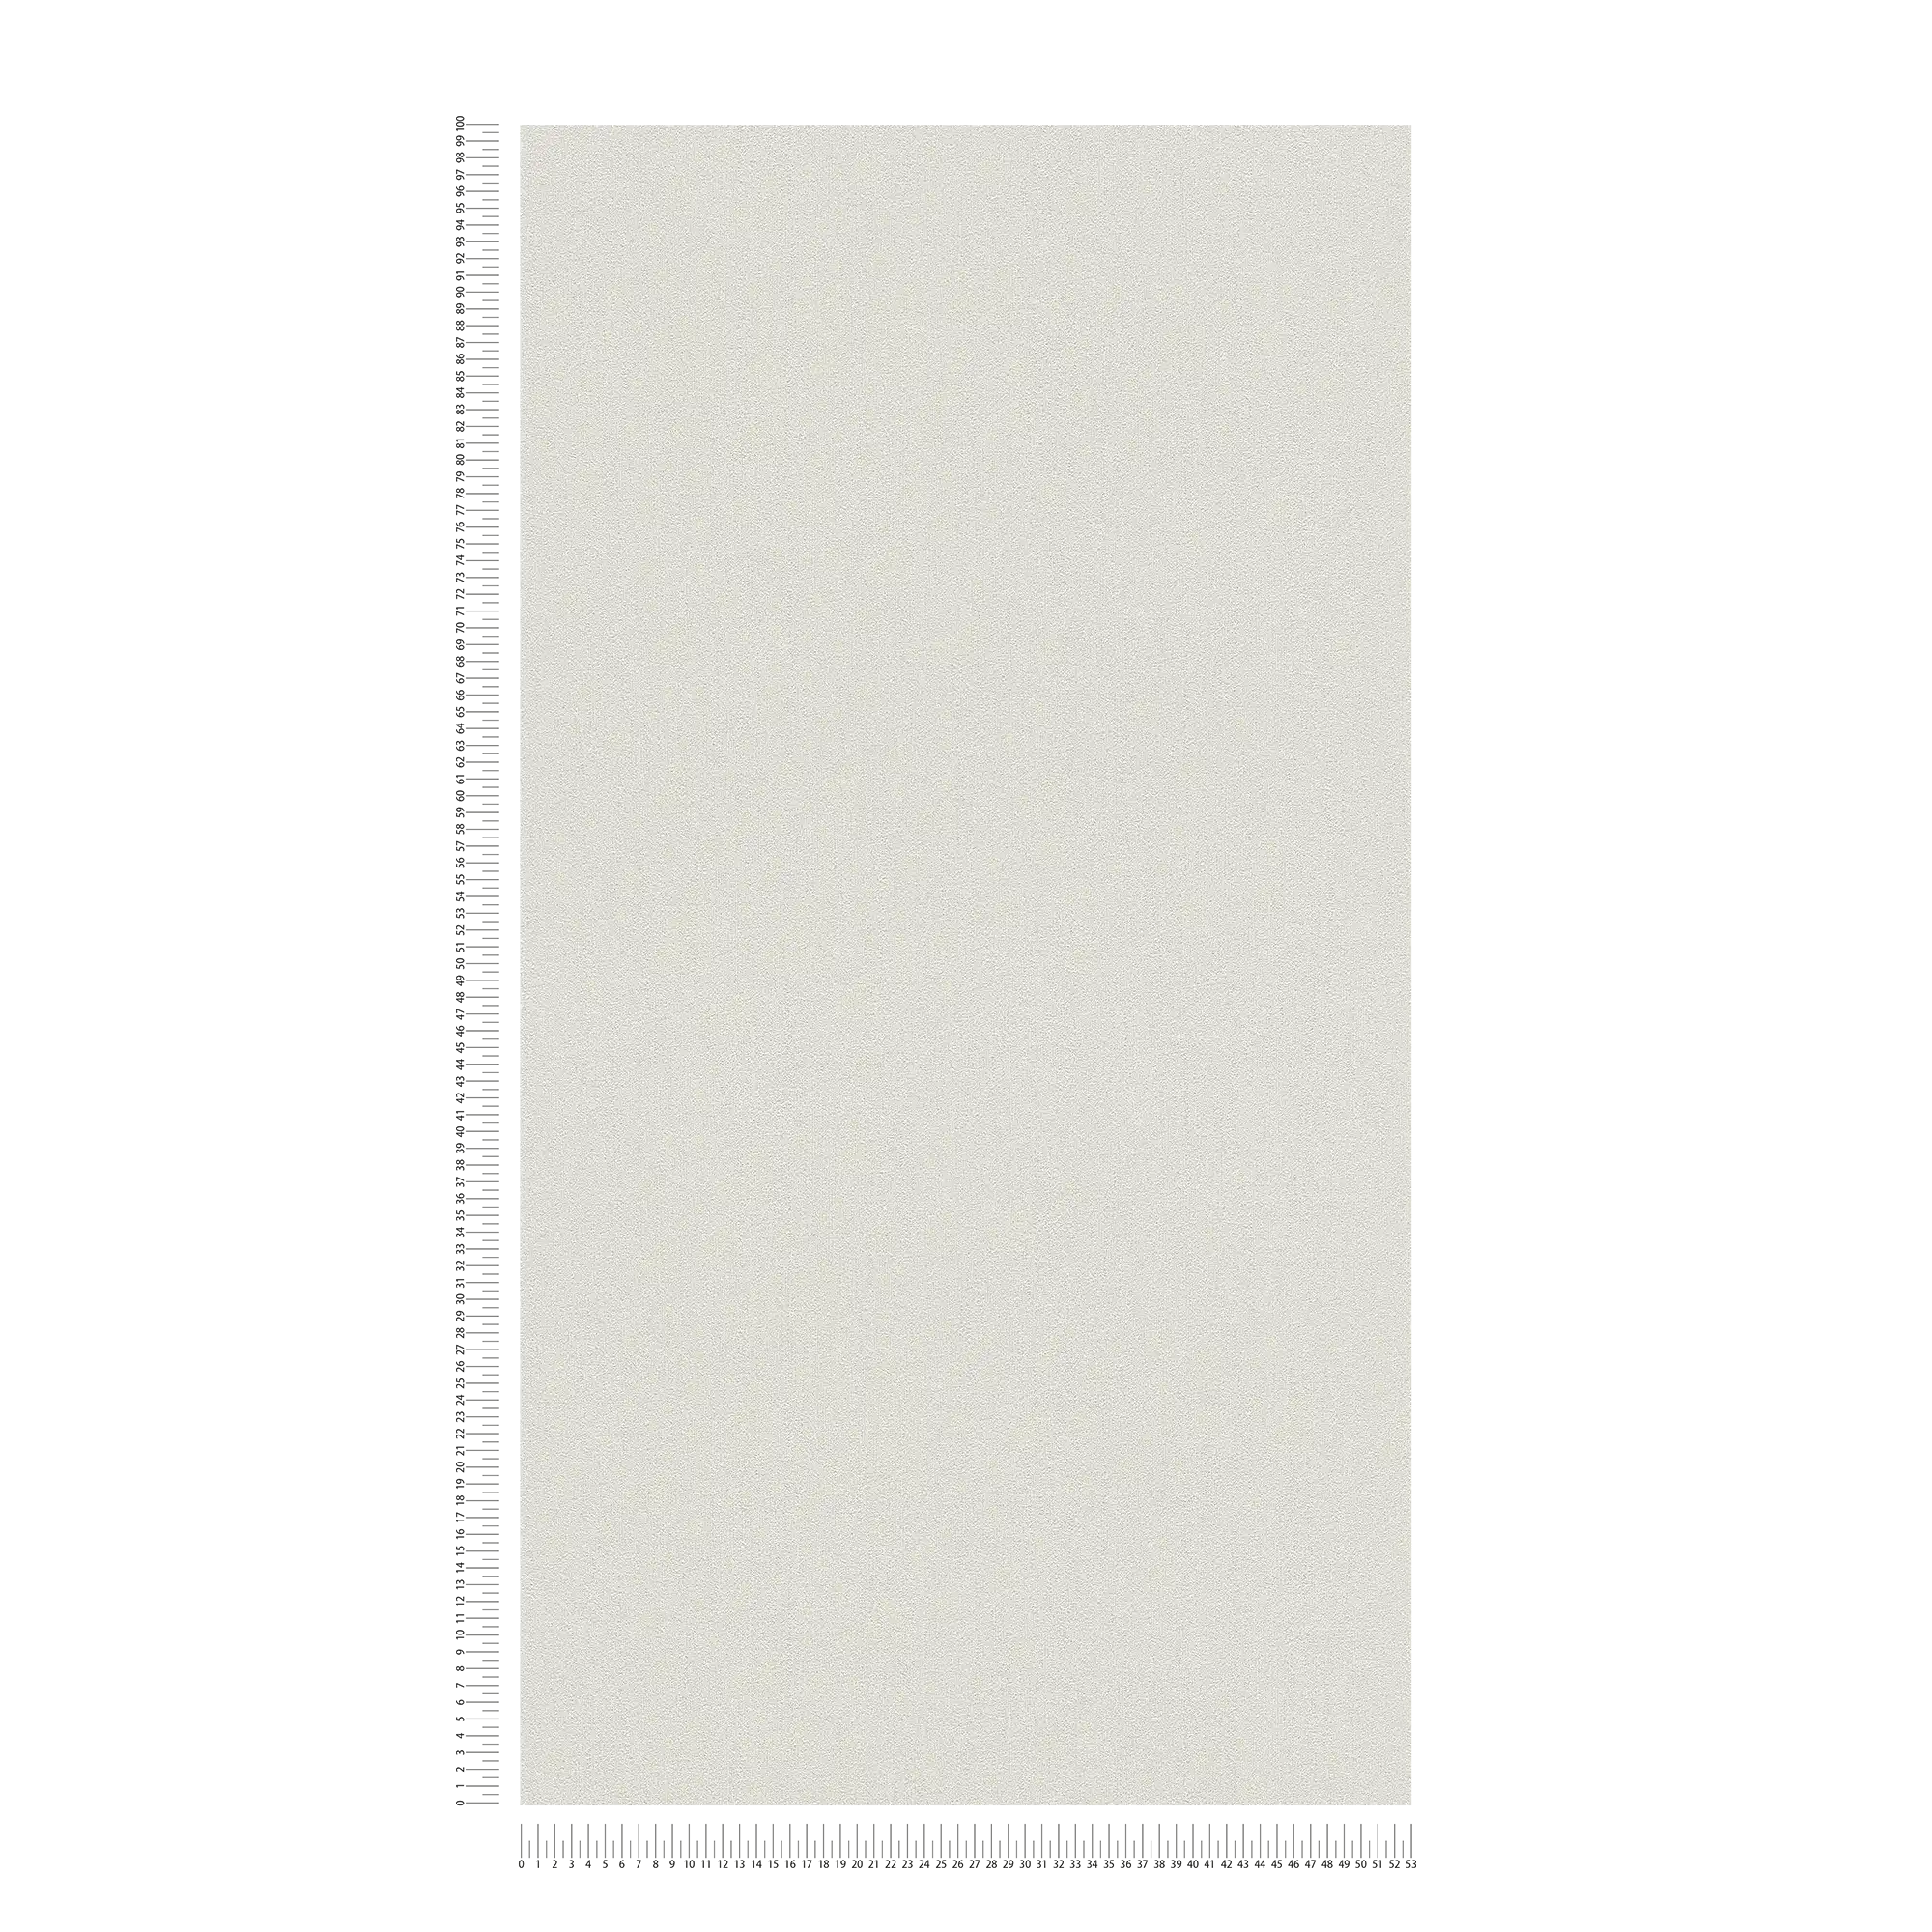             Wallpaper Karl LAGERFELD with embossed texture - grey, white
        